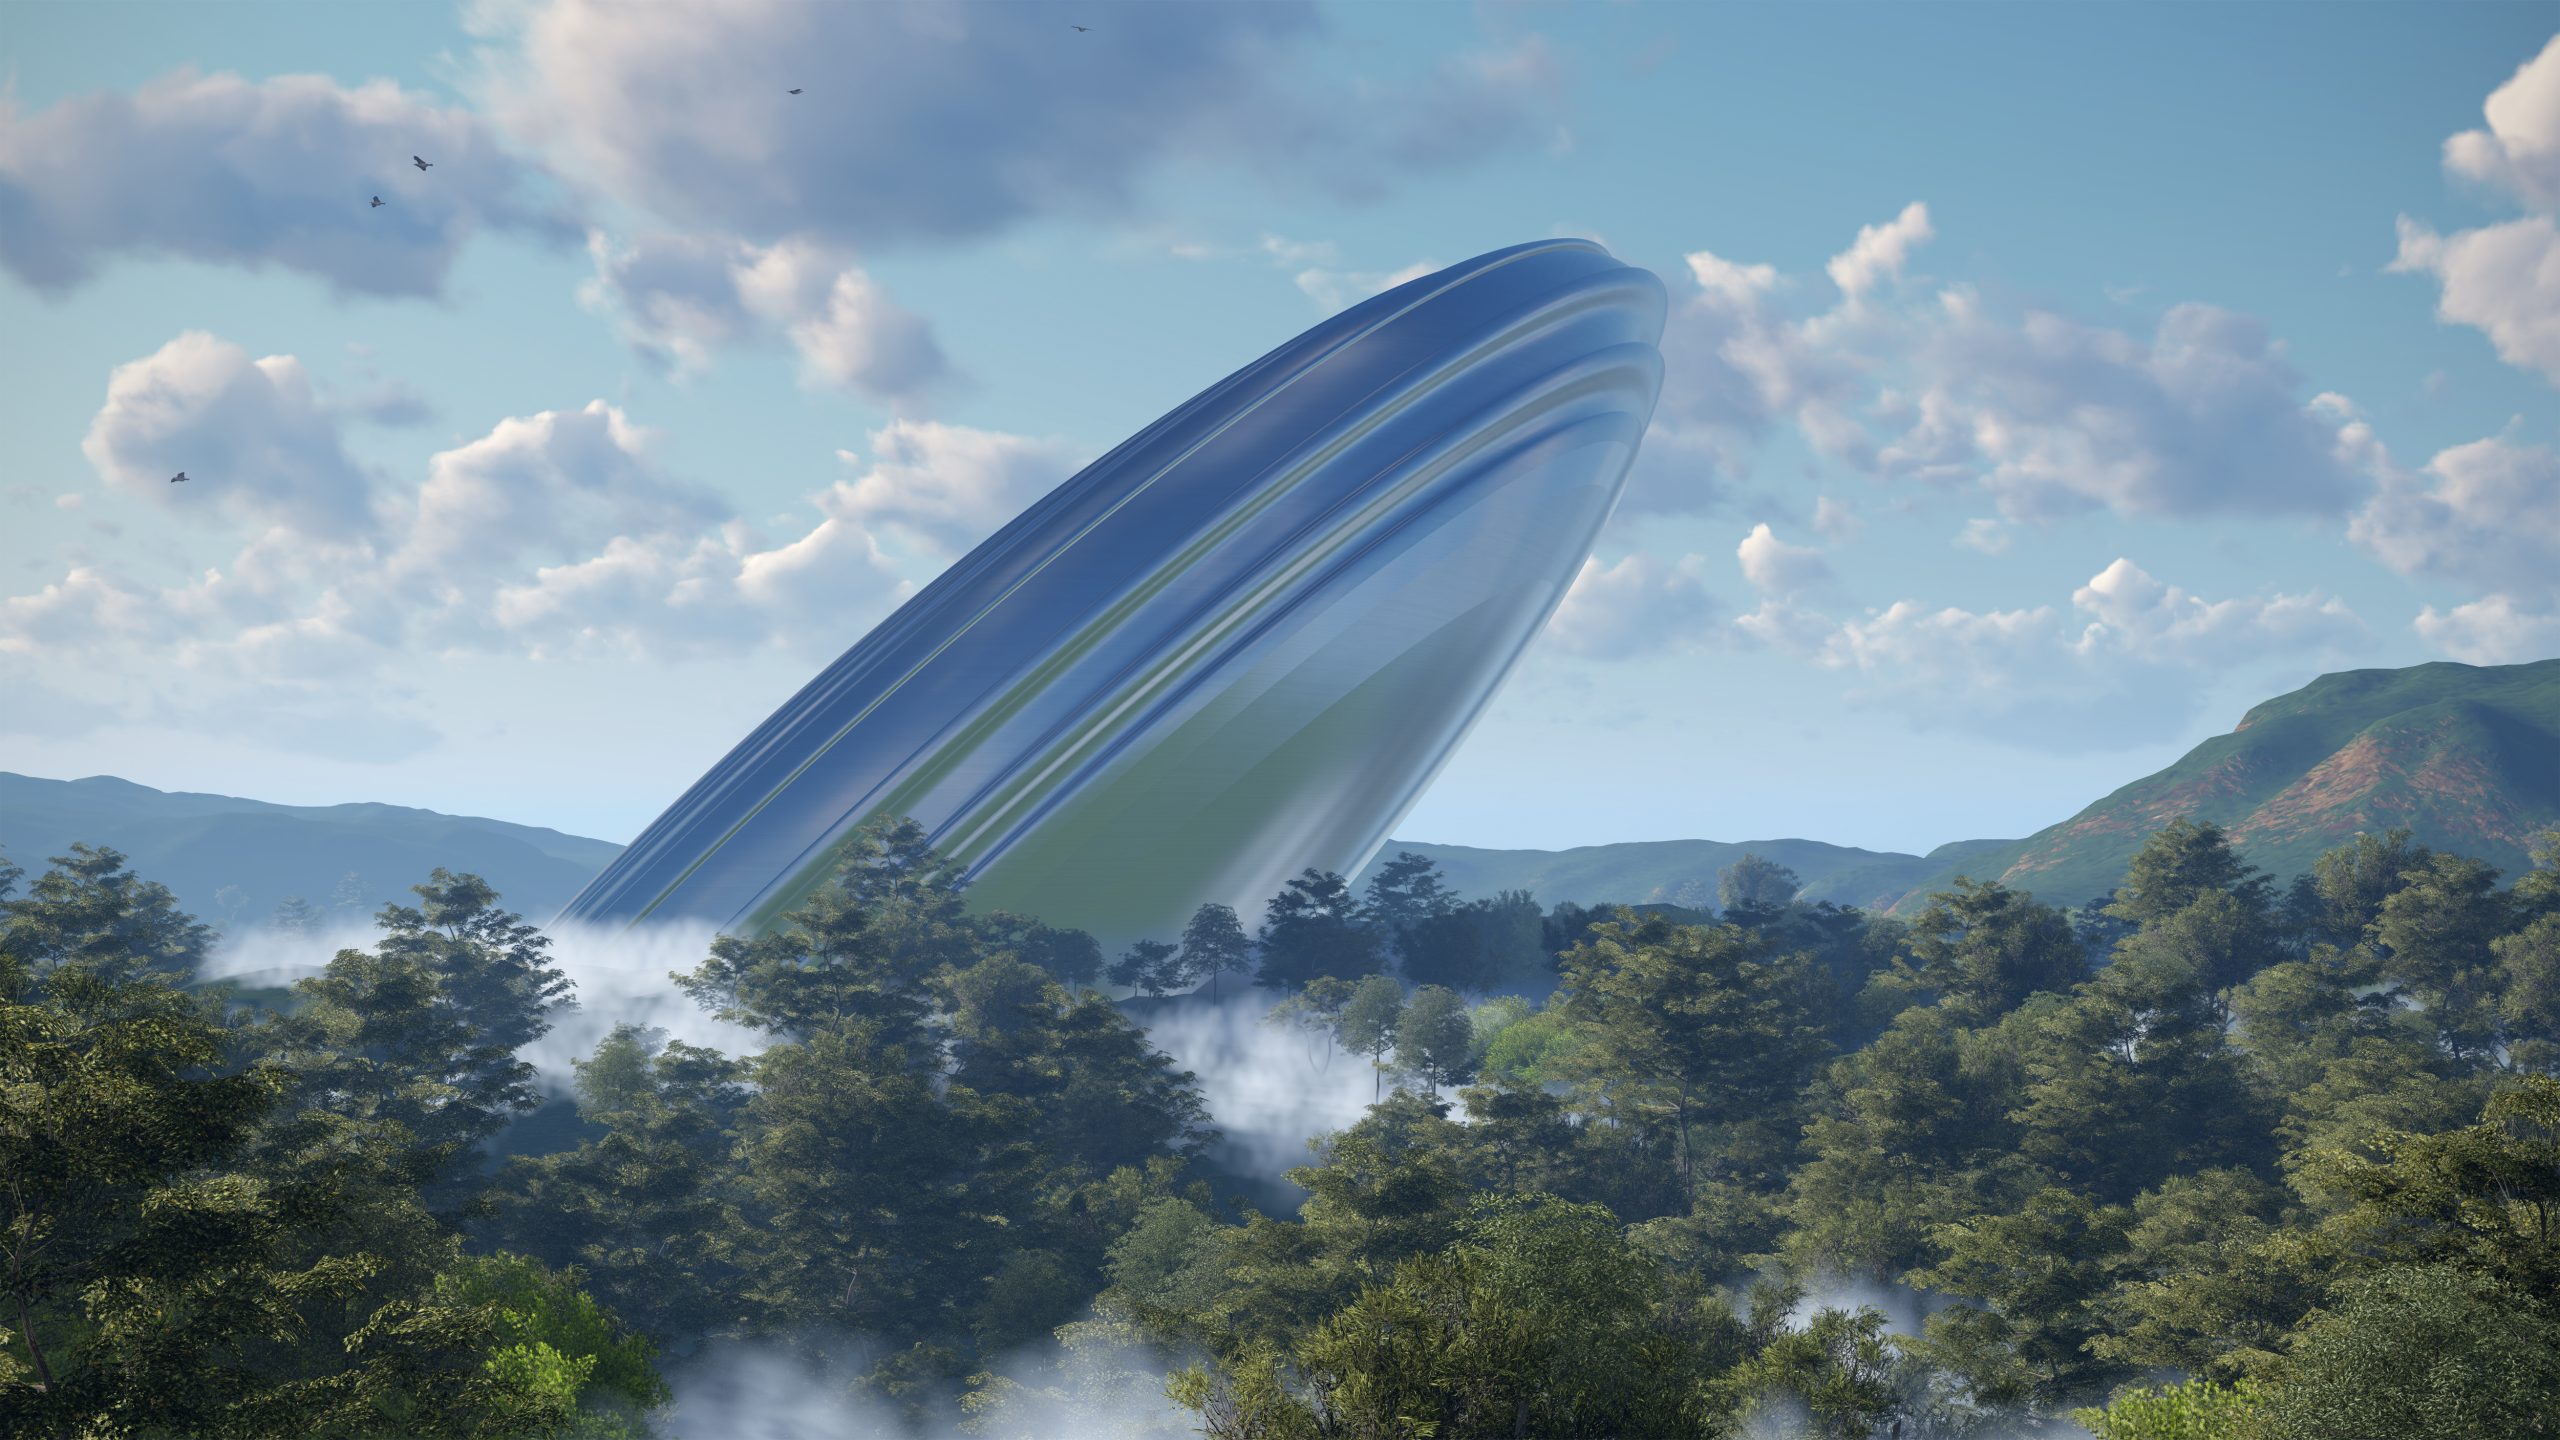 Artistic rendering of a crashed UFO and alien technology. Depositphotos.